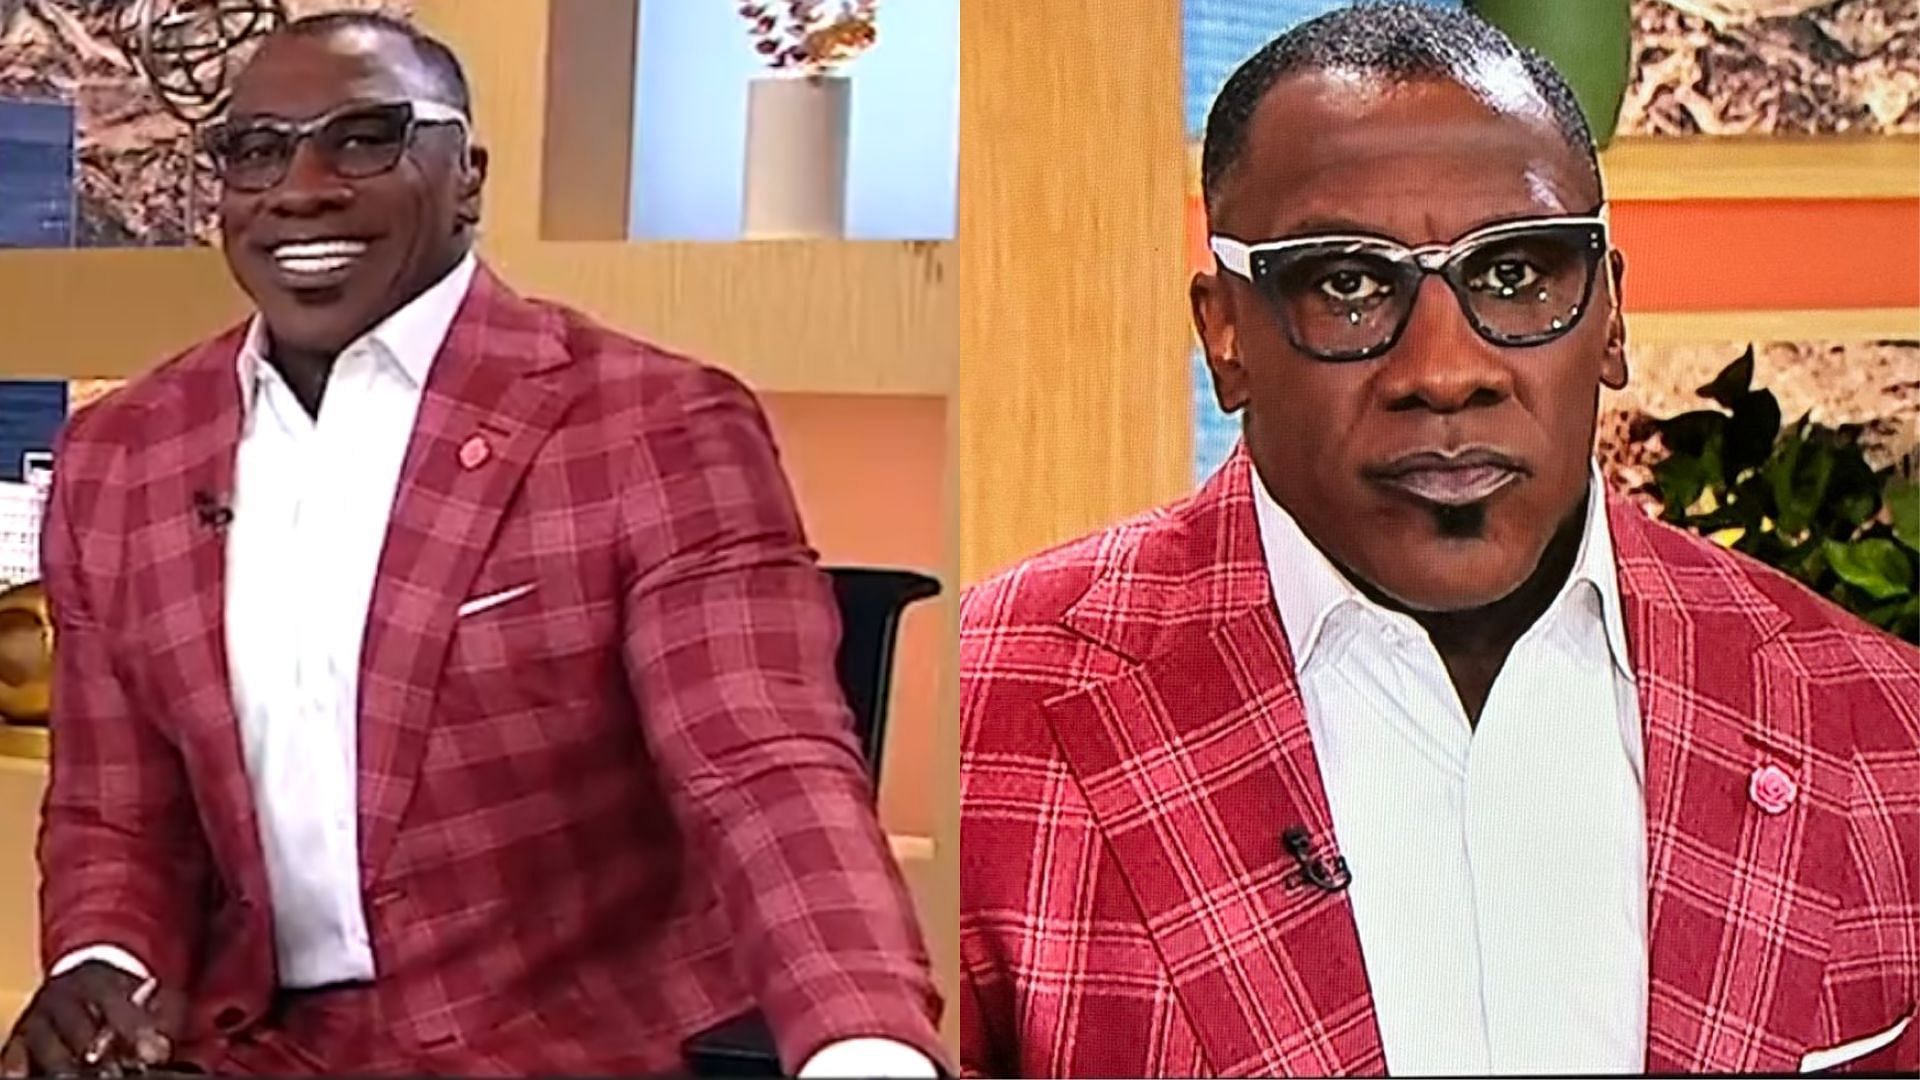 Viewers complained about Shannon Sharpe